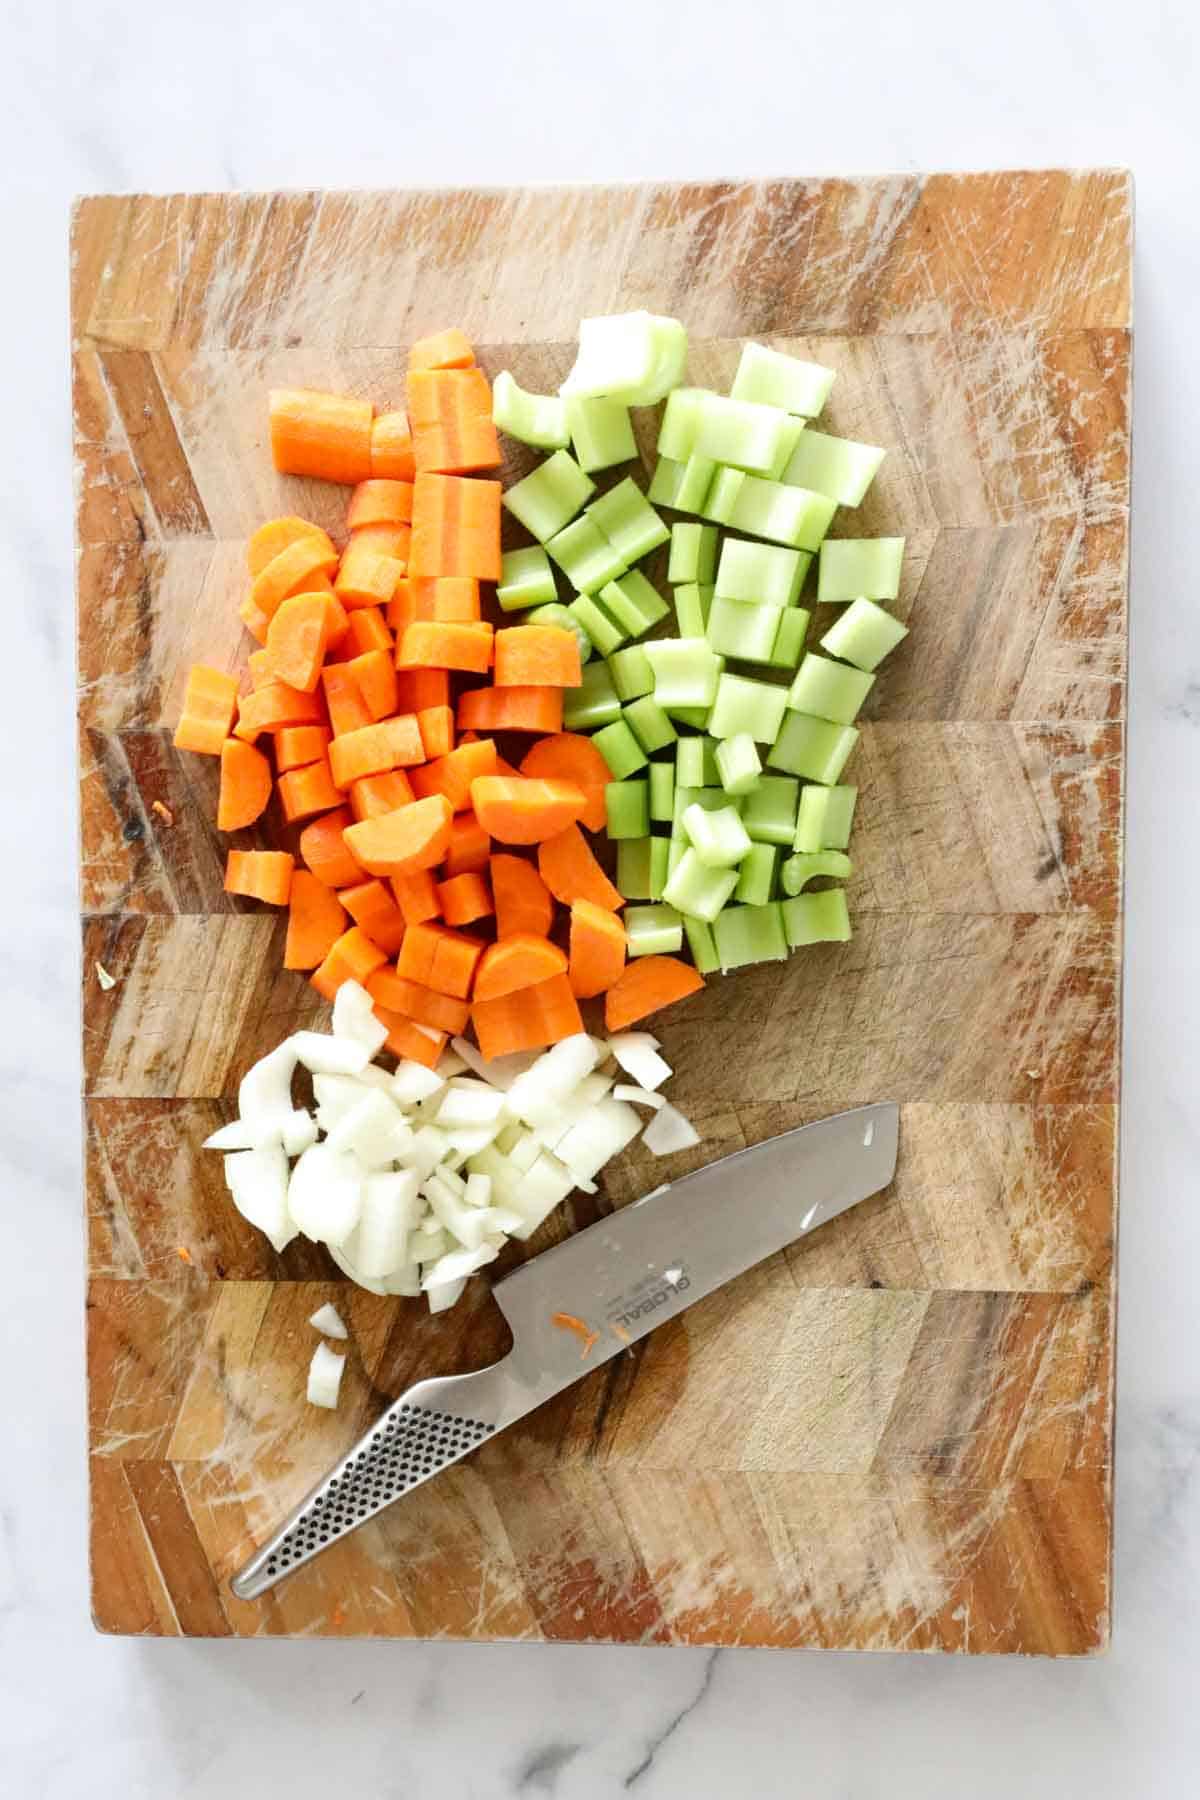 Chopped carrots, celery and onion on a wooden chopping board.